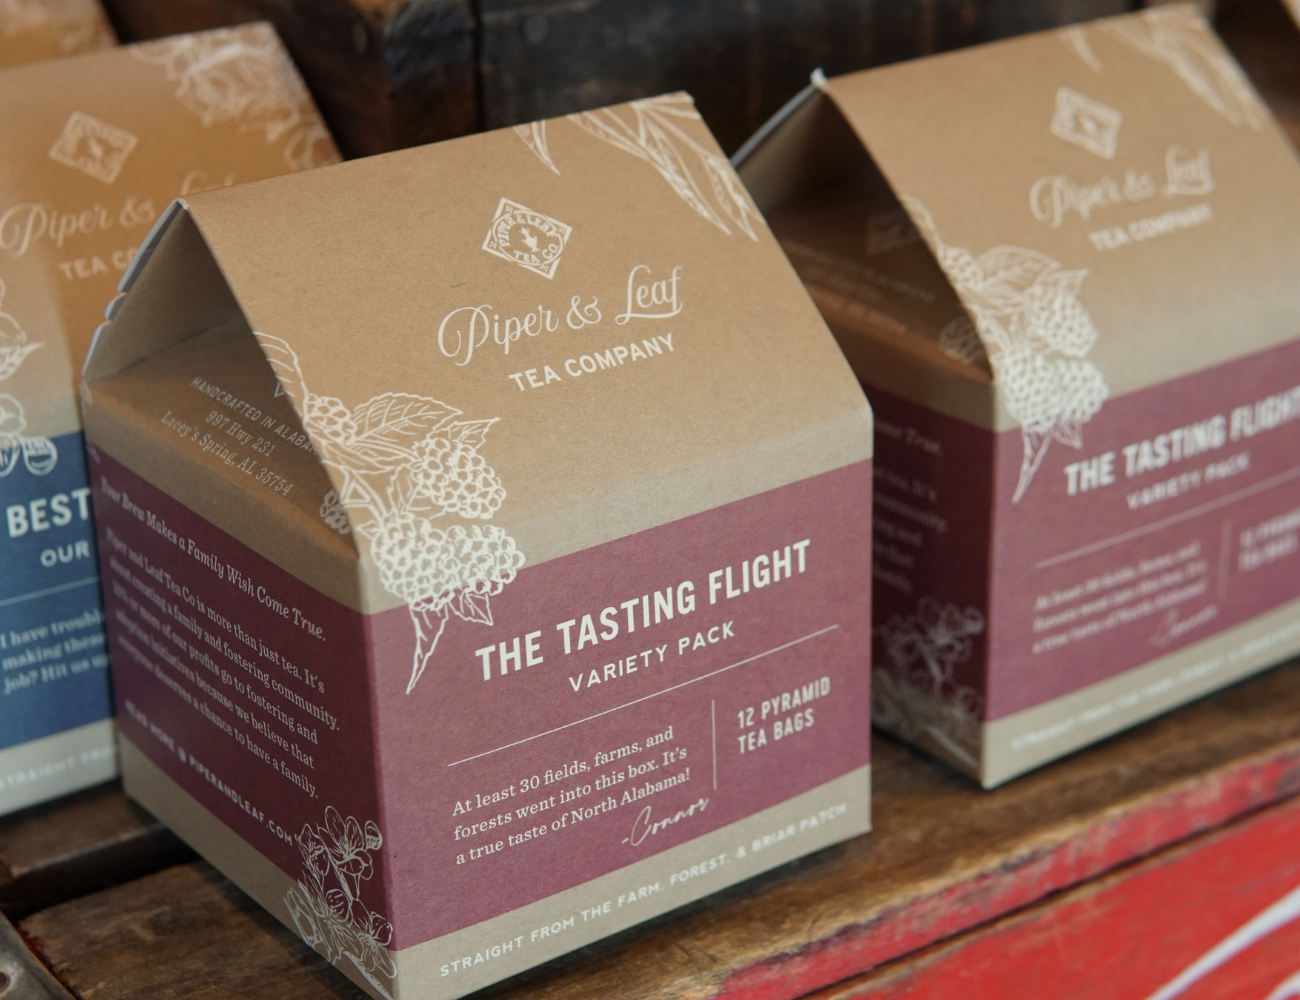 Boxes of "The Tea Tasting Flight- Box of 12 Individually Wrapped Tea Bags" blends variety pack by Piper & Leaf Tea Co. displayed on a wooden surface.